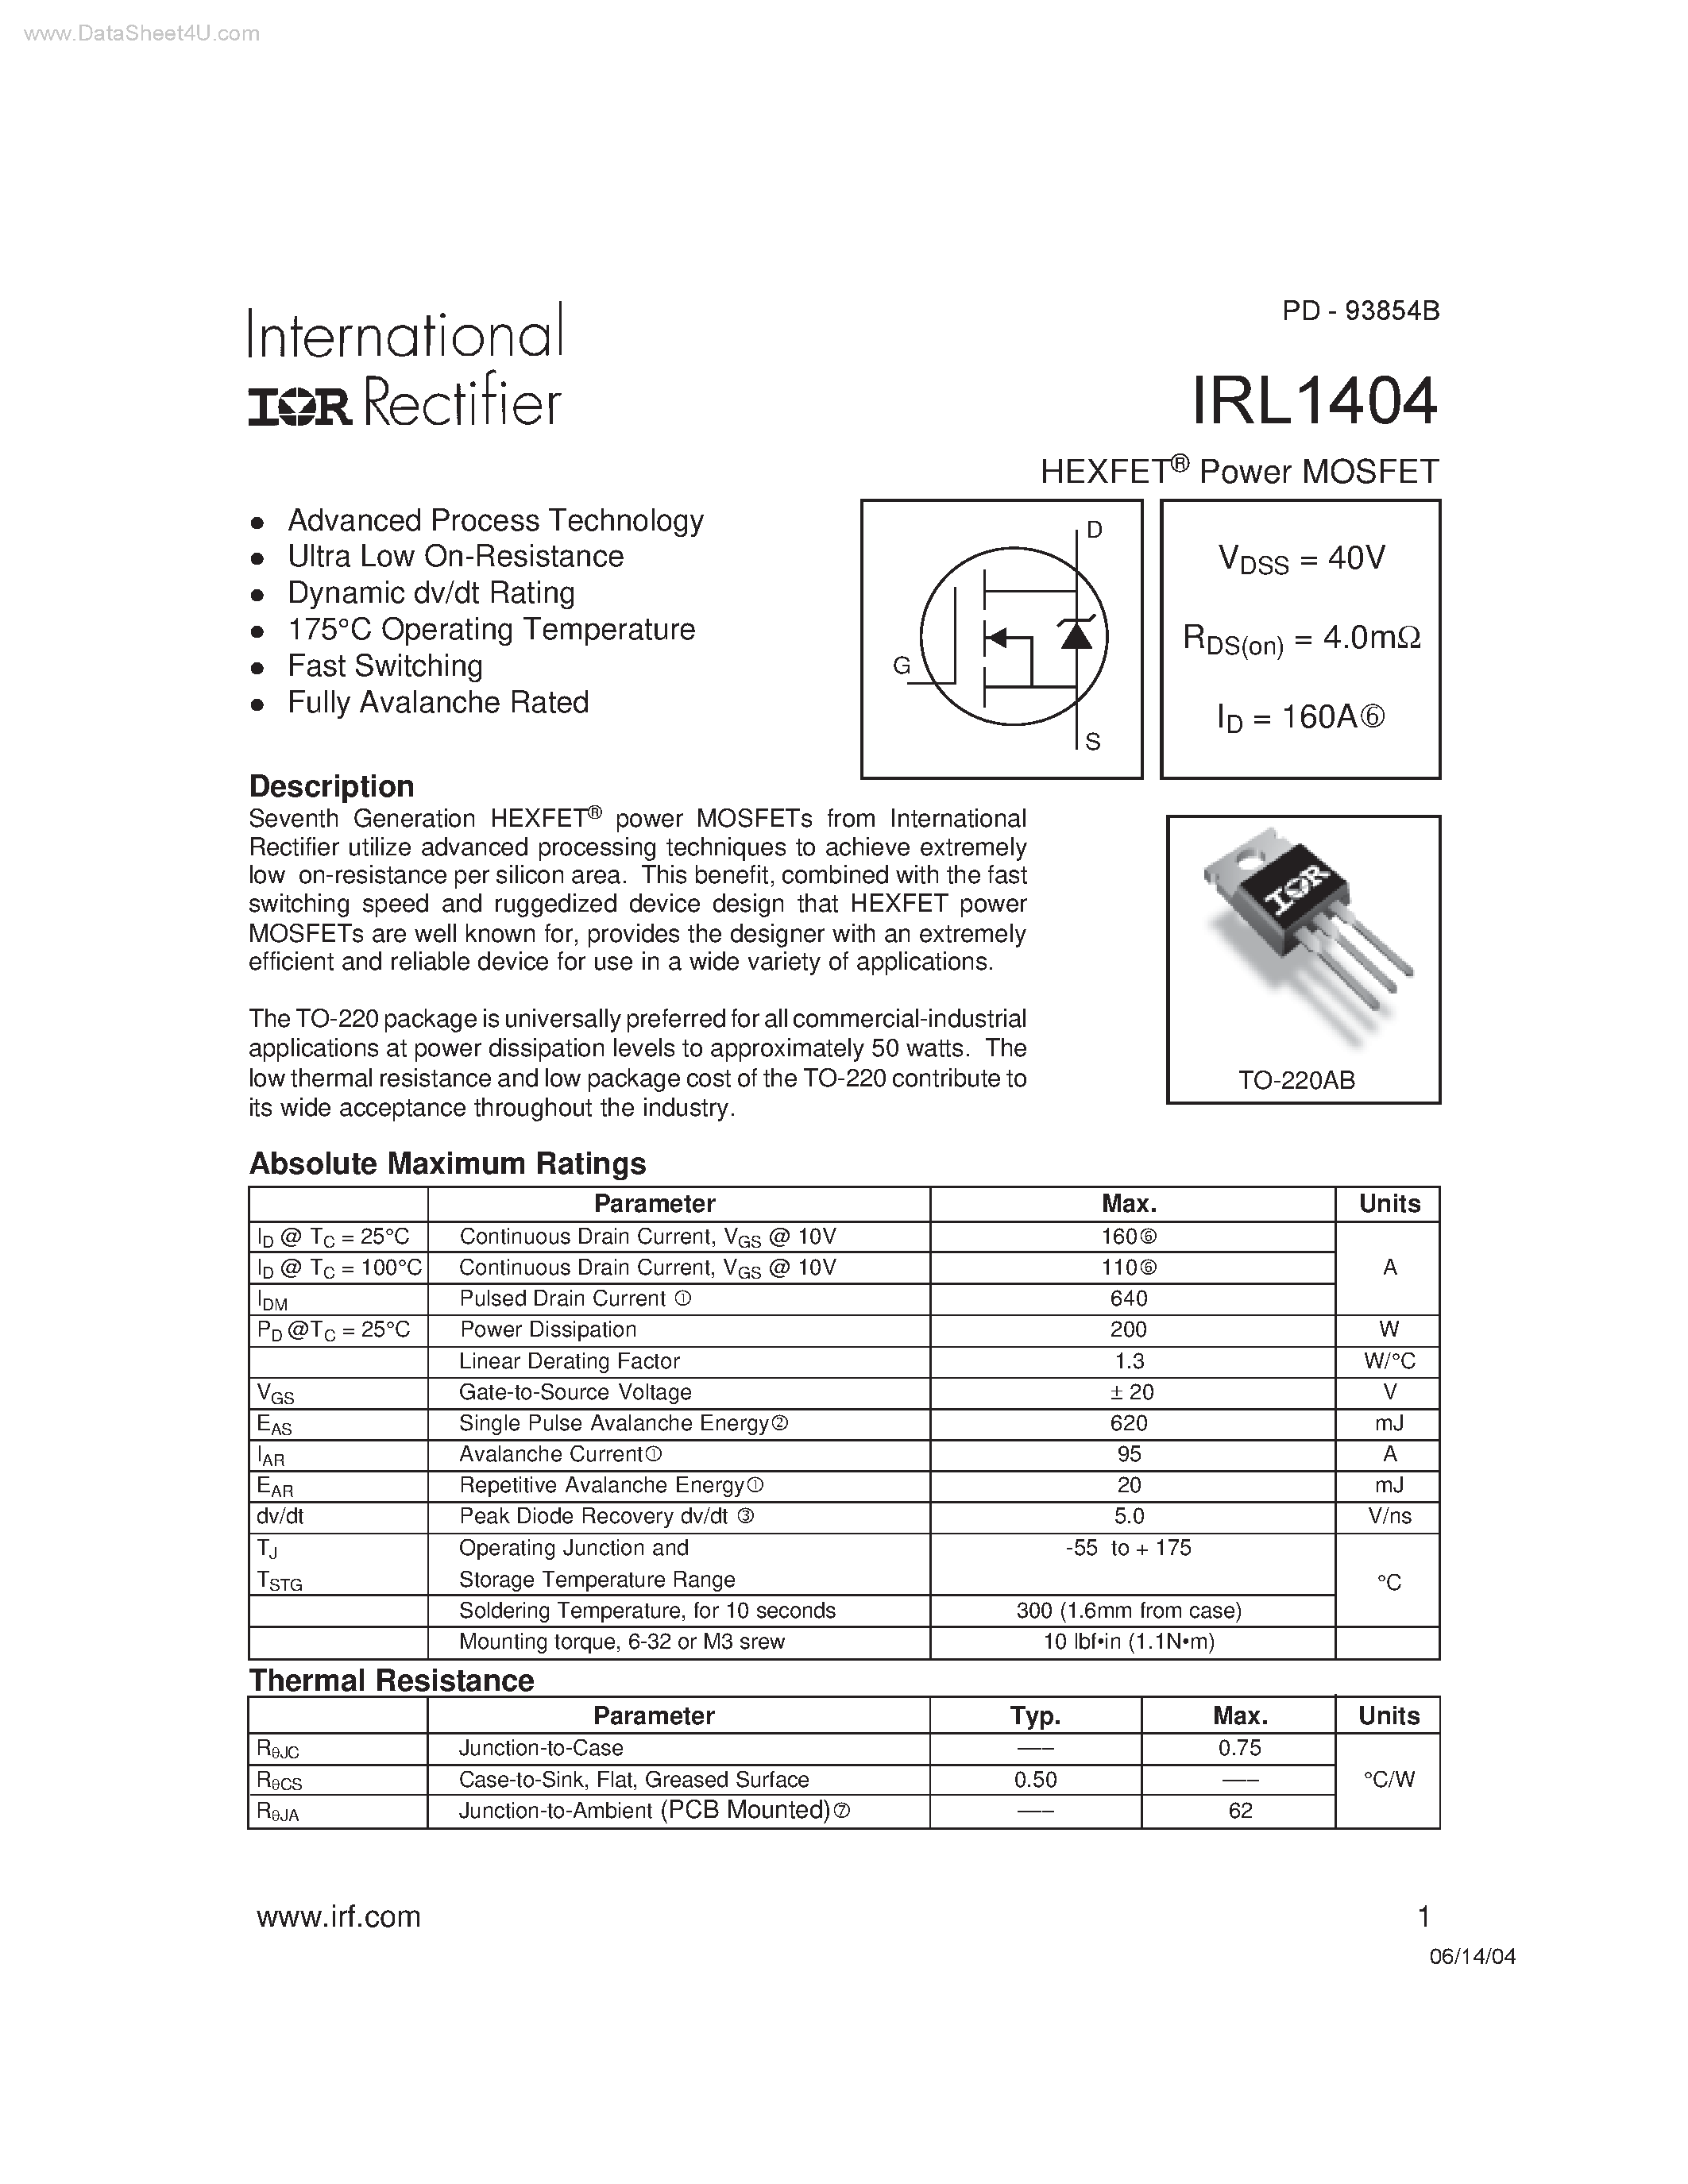 Даташит IRL1404 - HEXFET Power MOSFET страница 1